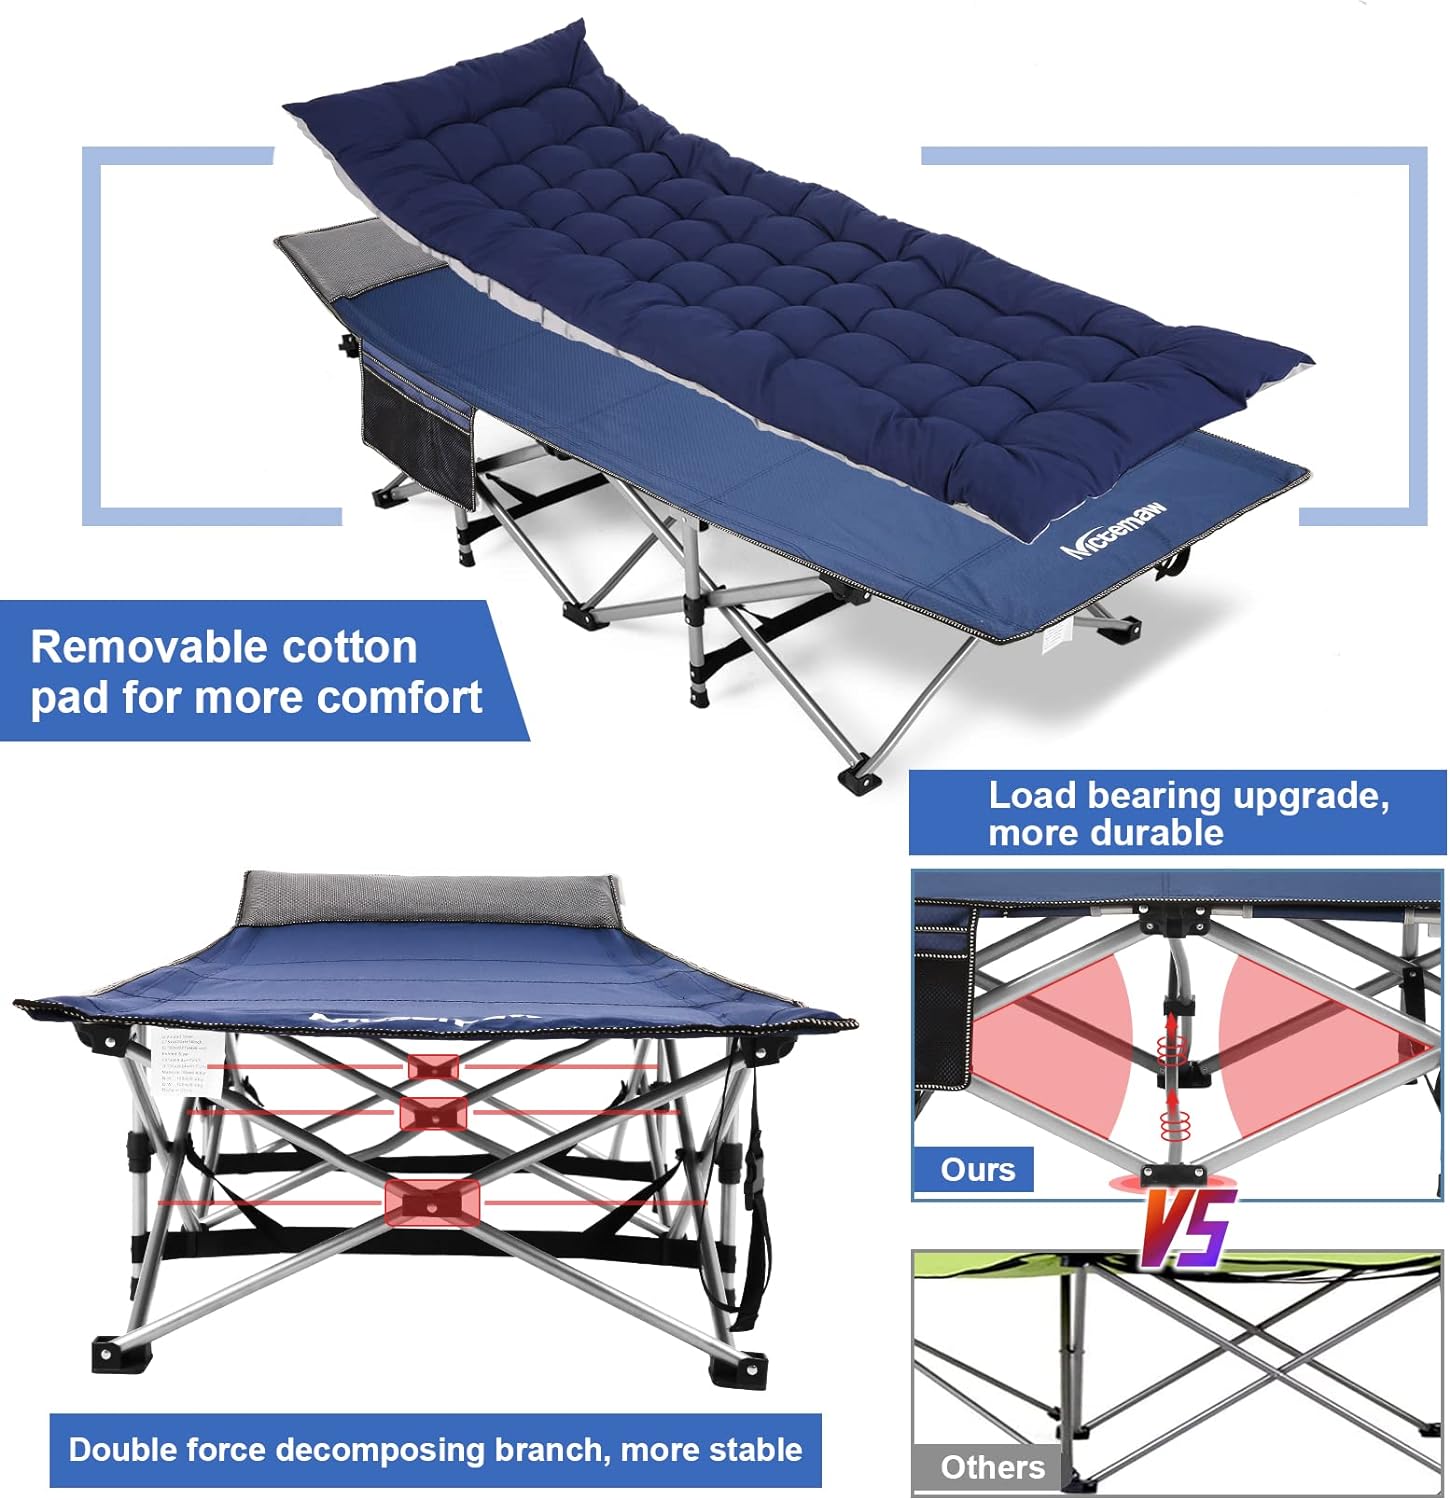 Nictemaw Folding Camping Cot with Cotton Pad for Adults,Heavy Duty Sleeping Cot Bed with Carry Bag,Travel Camp Cots Portable for Outdoor